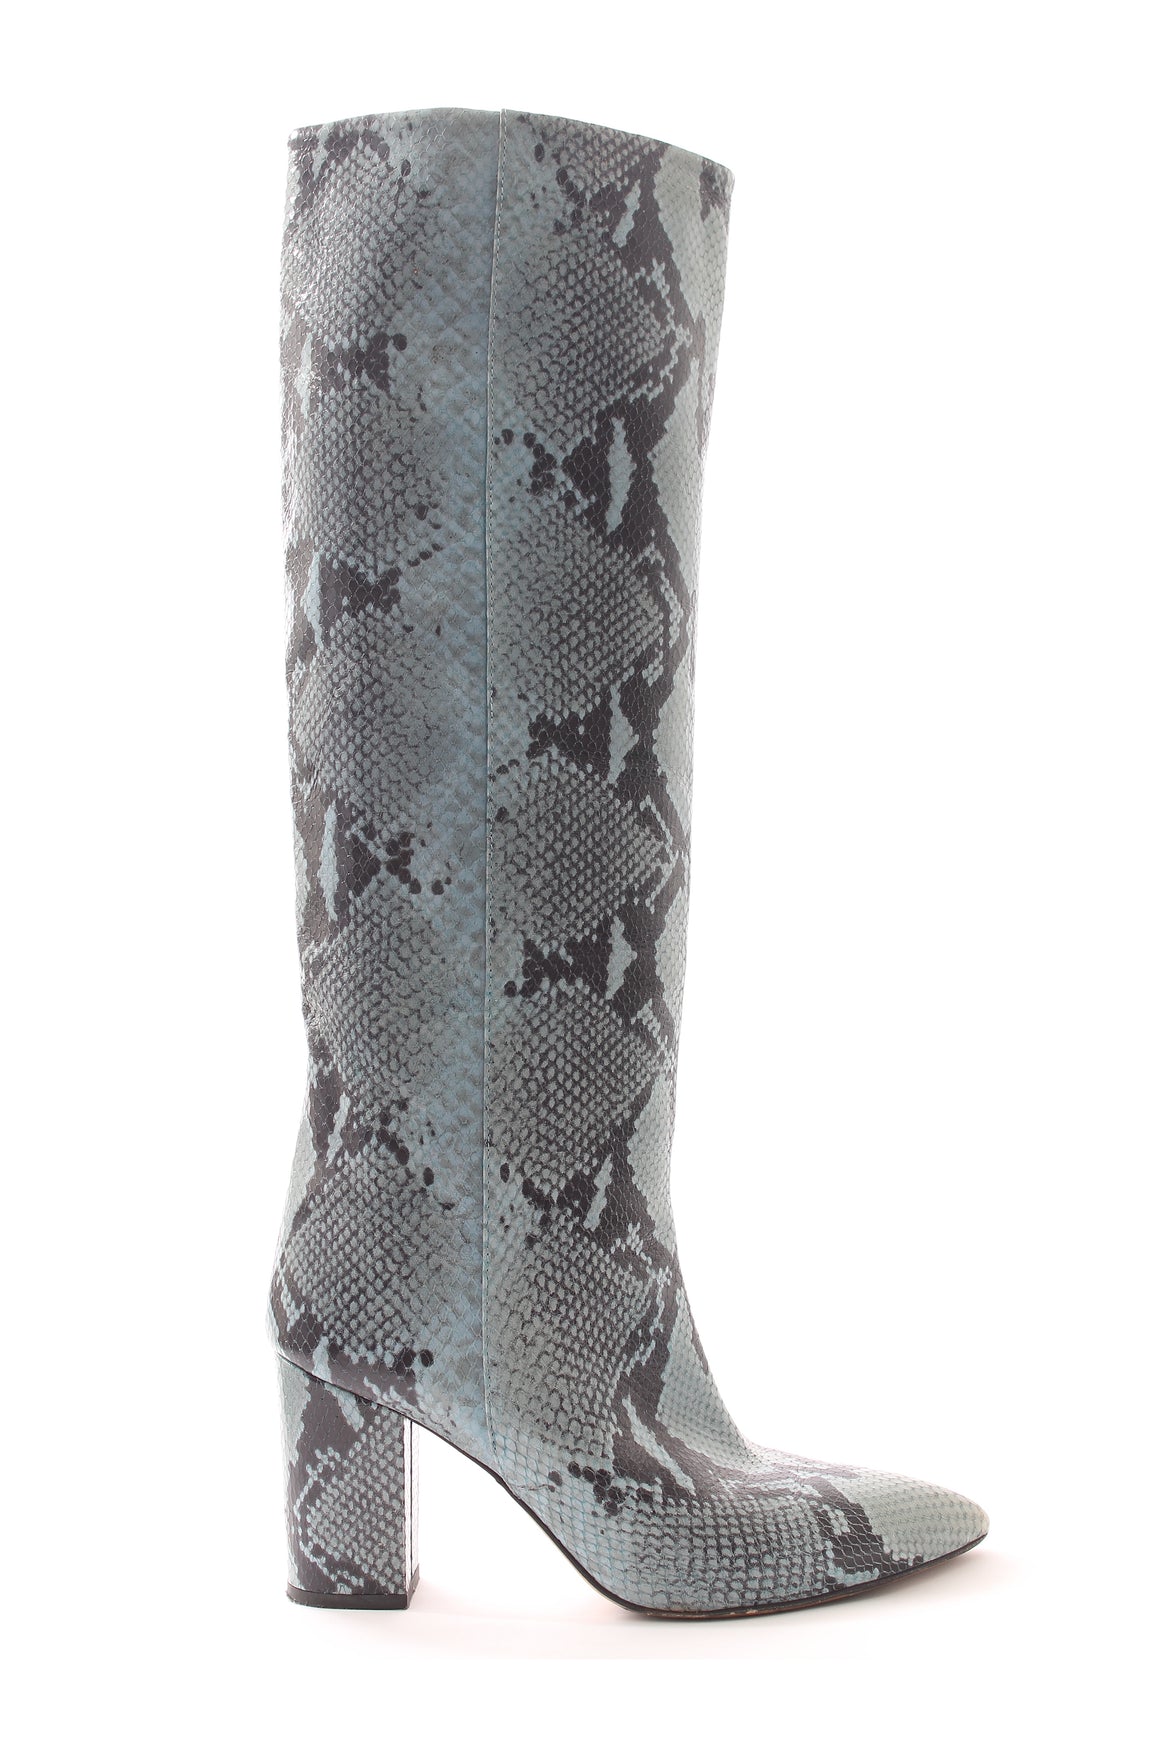 Paris Texas Snake-Effect Leather Knee Boots